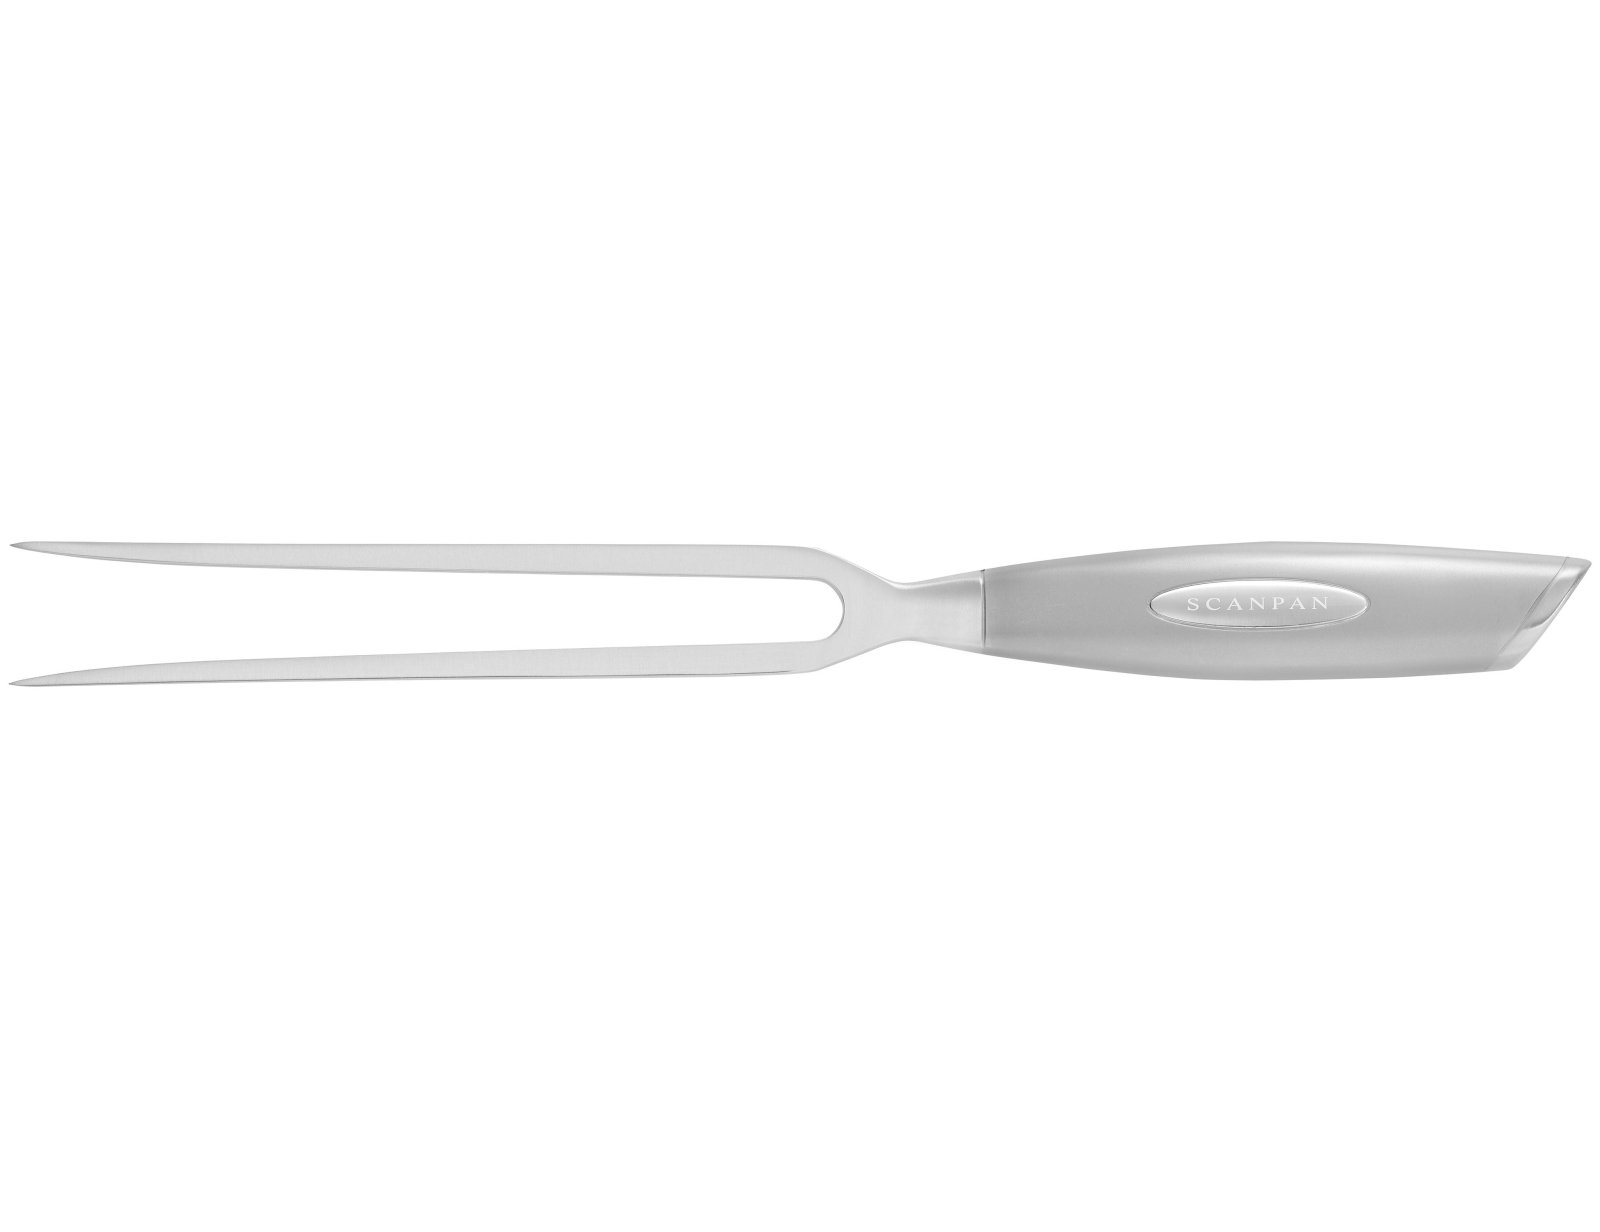 Scanpan Classic Steel 15cm Carving Fork - SP9001901500 - The Cotswold Knife Company